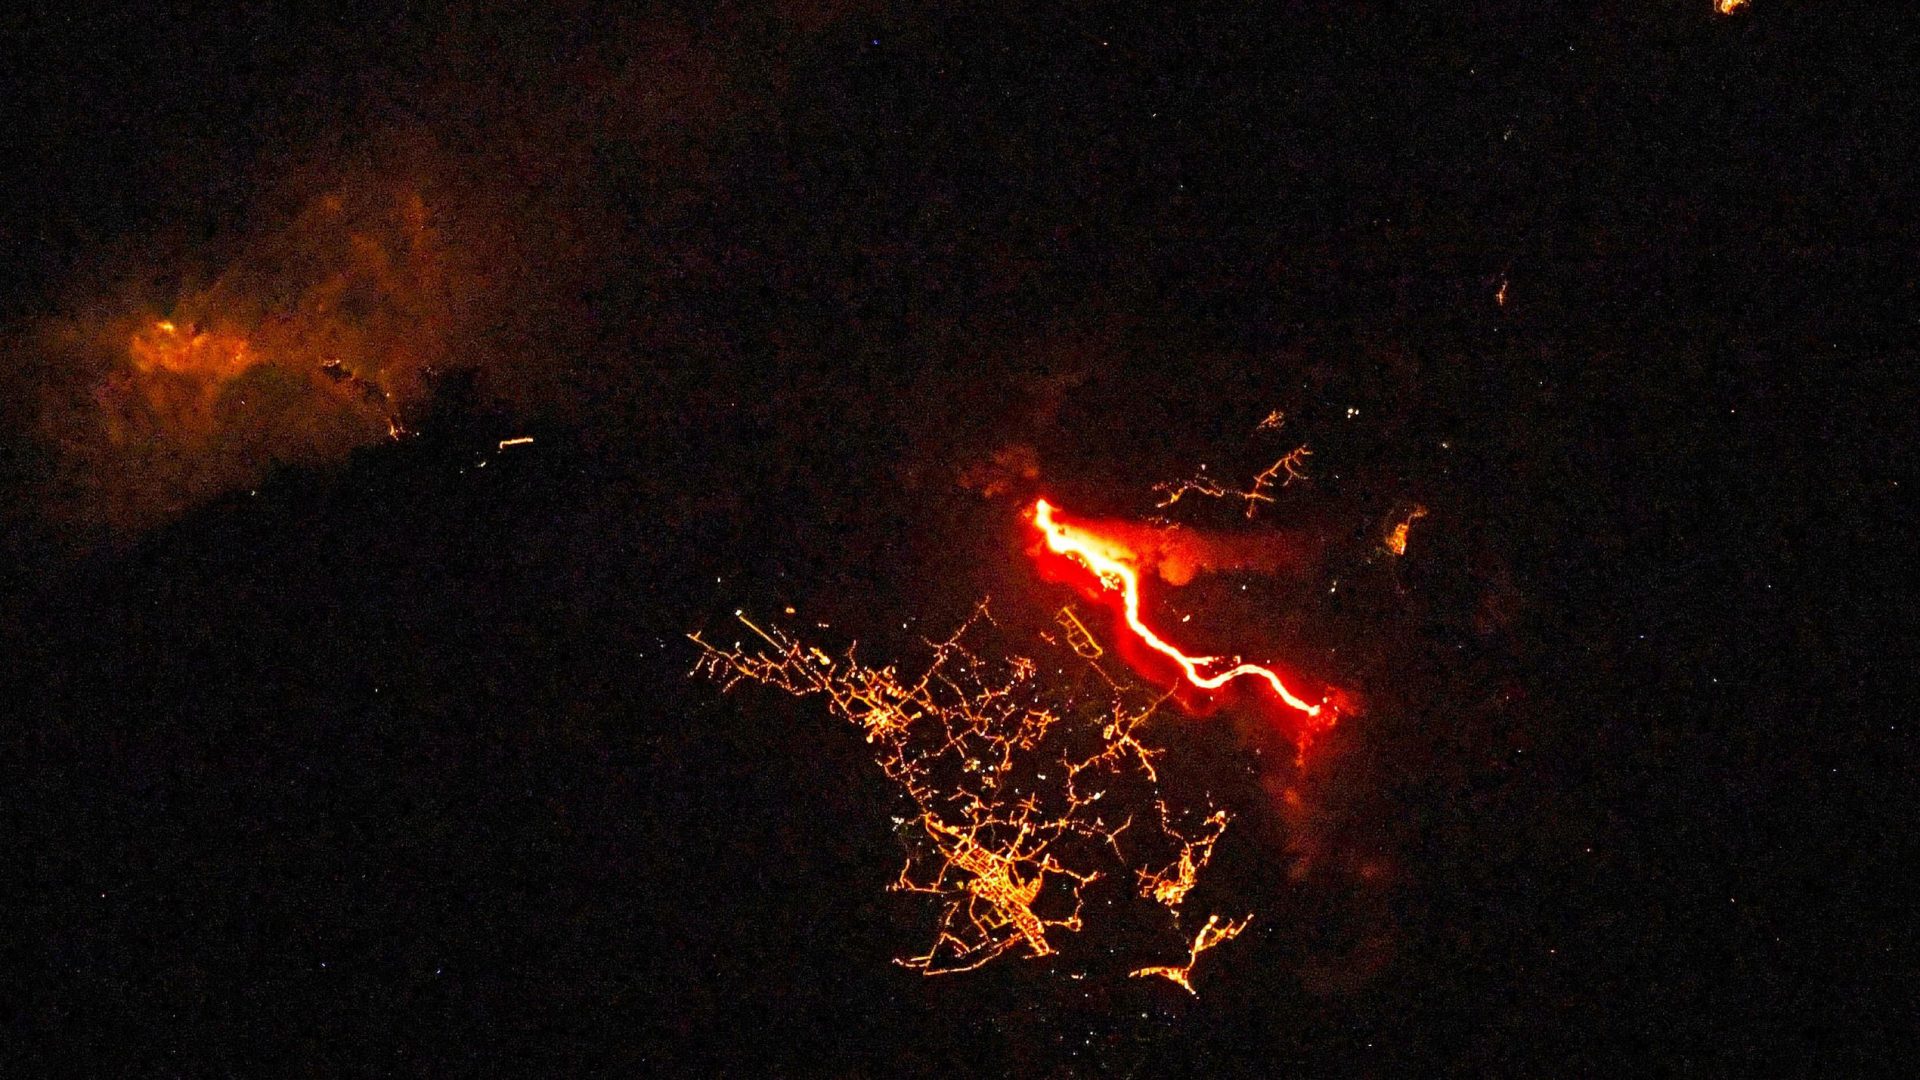 Unstoppable lava from La Palma volcano eruption reaches ocean in gorgeous train photography